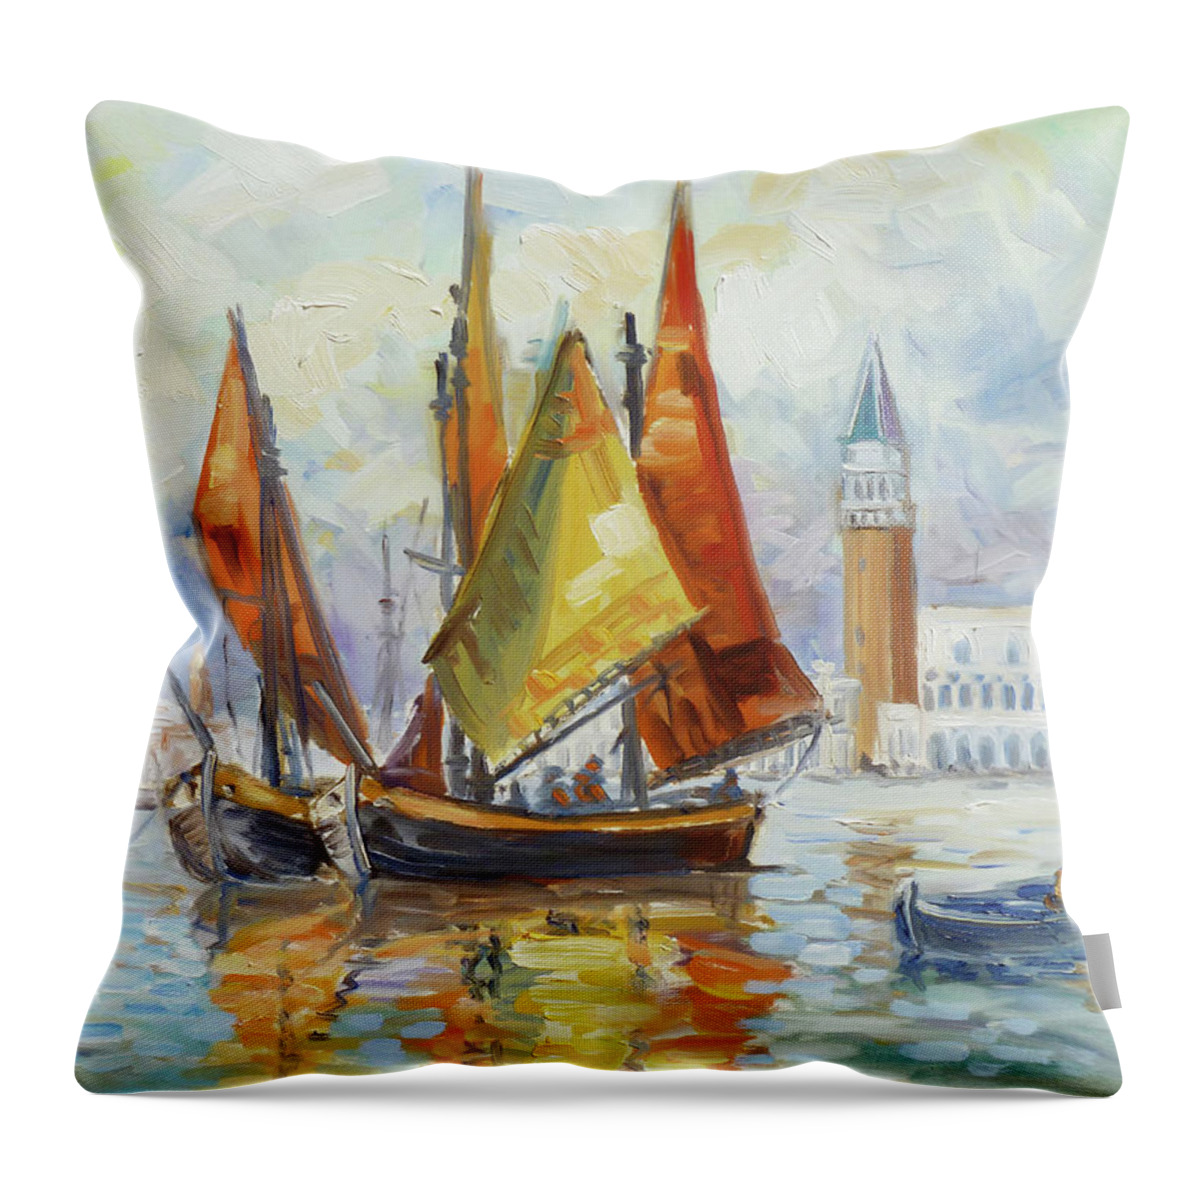 Sails Throw Pillow featuring the painting Sails 10 - Venice San Marco by Irek Szelag